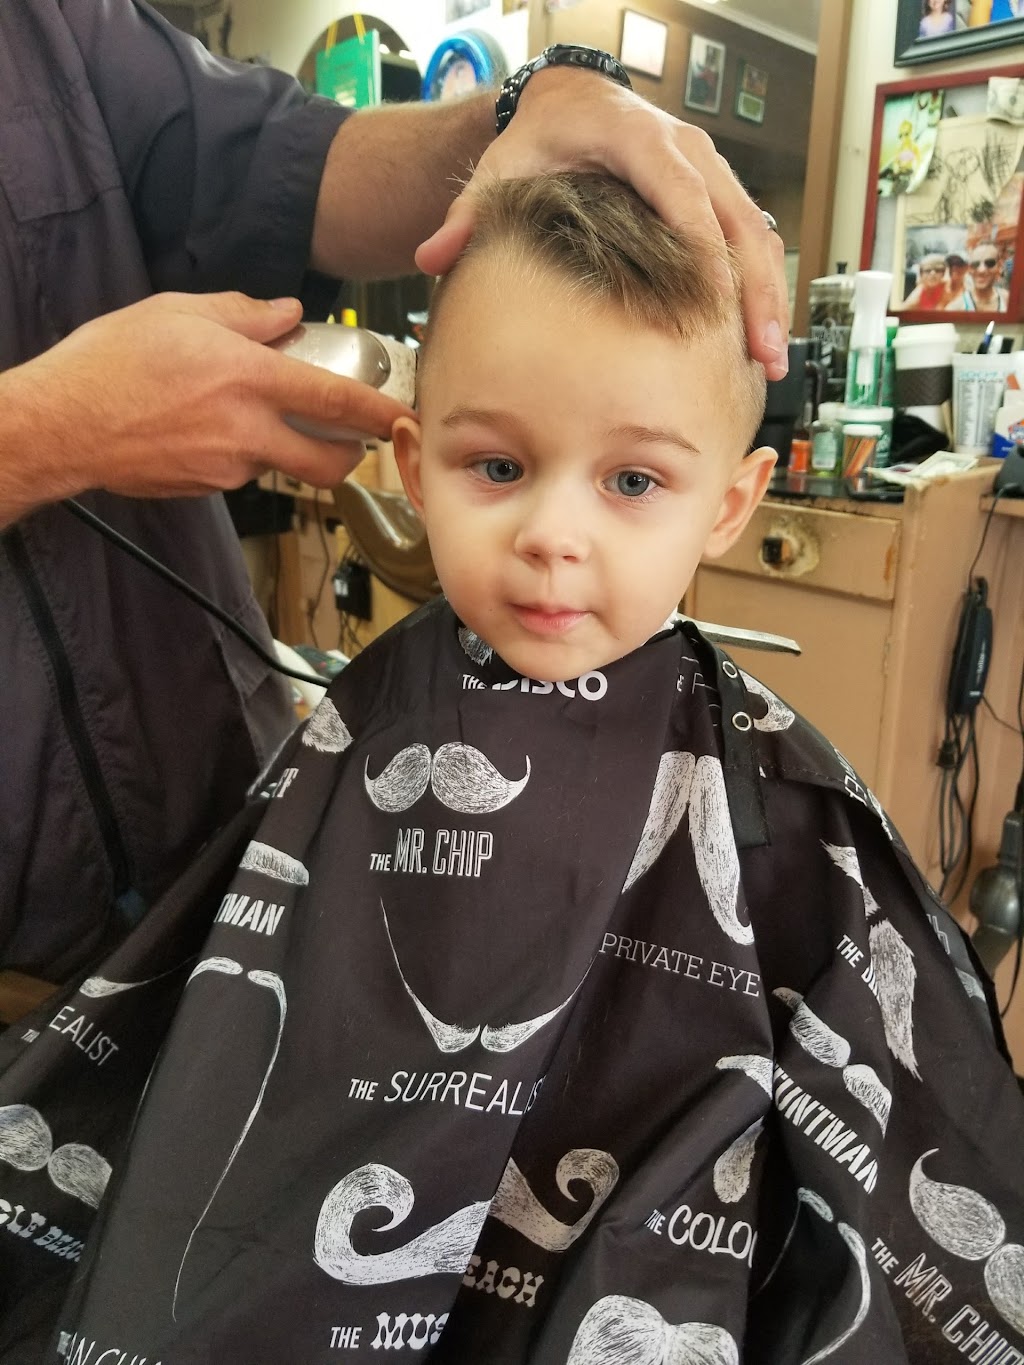 Montgomery Barber Shop | 244 2nd Ave, Gallipolis, OH 45631 | Phone: (740) 446-0073